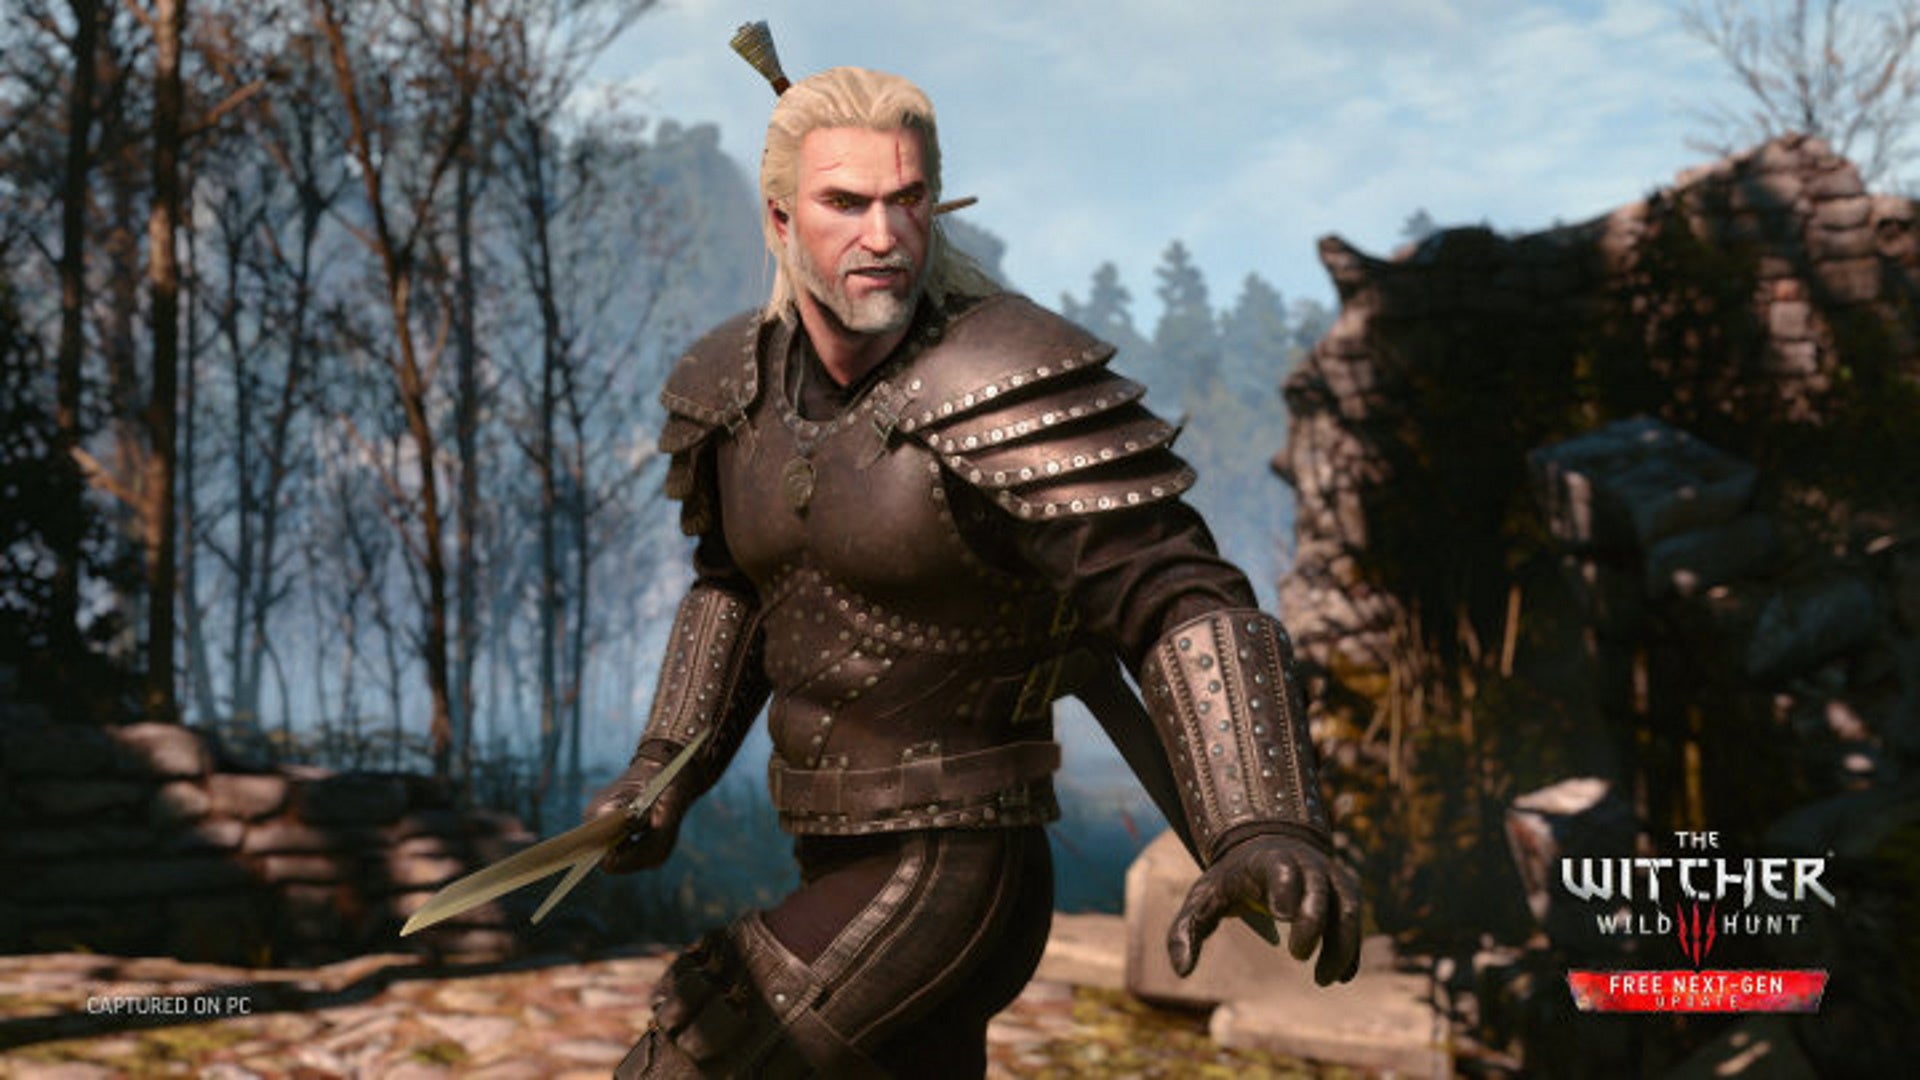 The Witcher 3 best weapons and armor: A white man with long white hair, wearing black plate armor, stands poised with a sword, ready to attack. He's in a barren field with scorched trees behind him